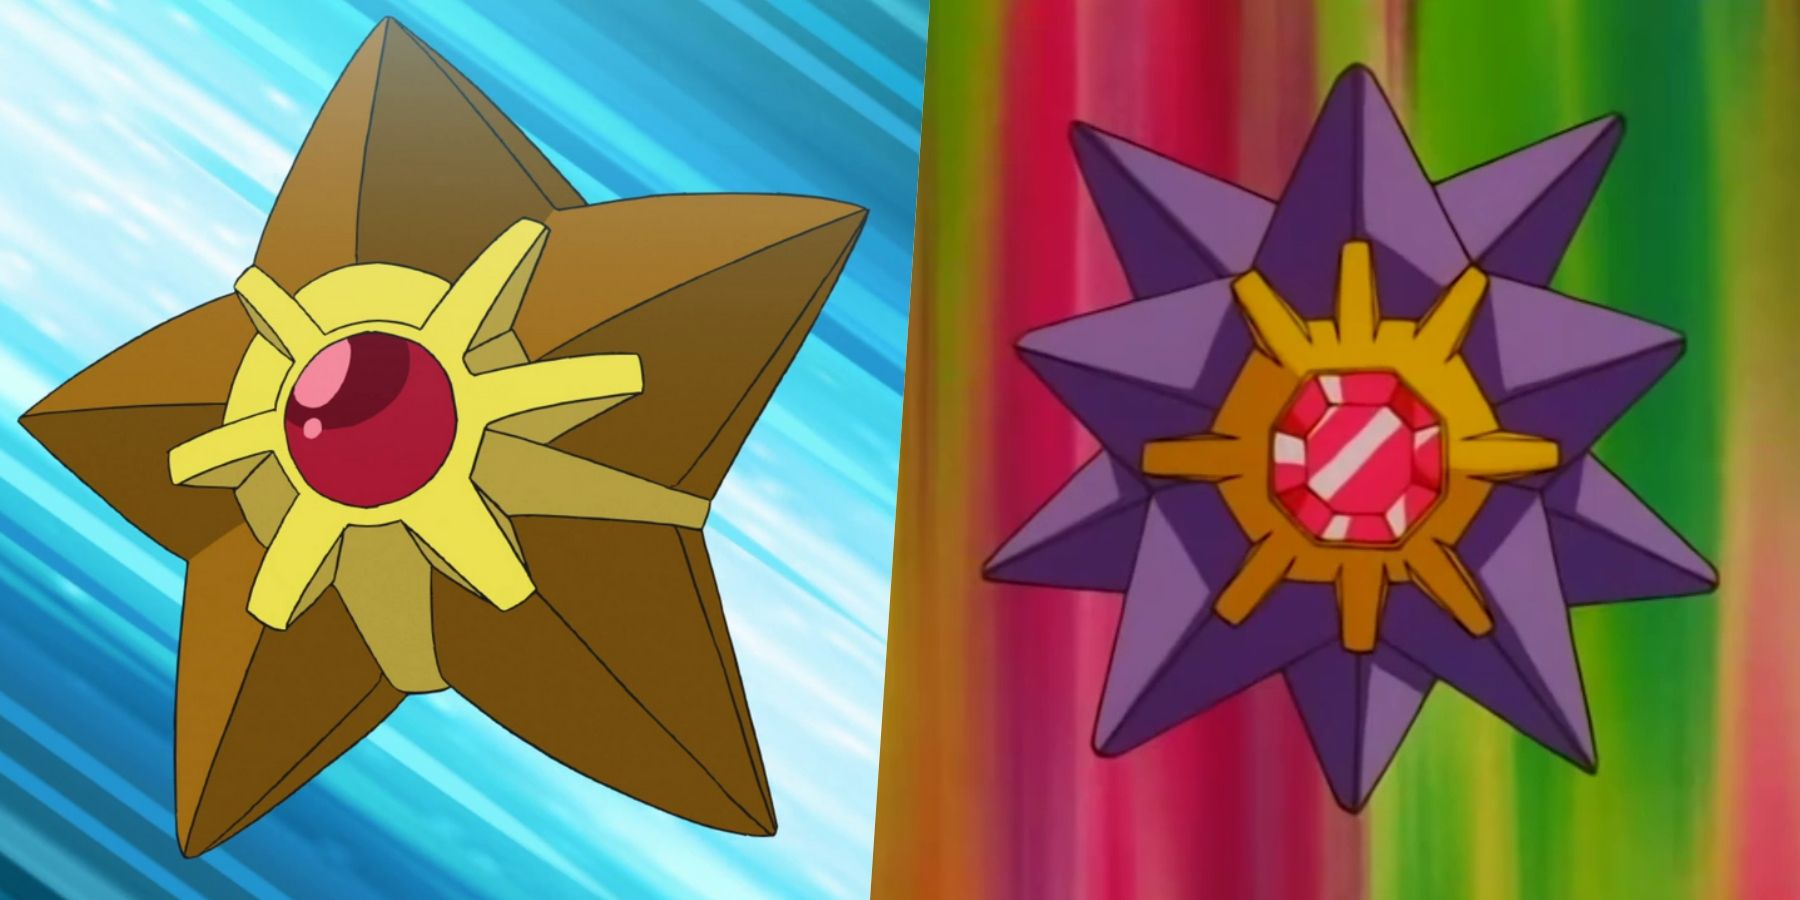 Pokemon Fan Designs Steel-Type Variants for Staryu and Starmie